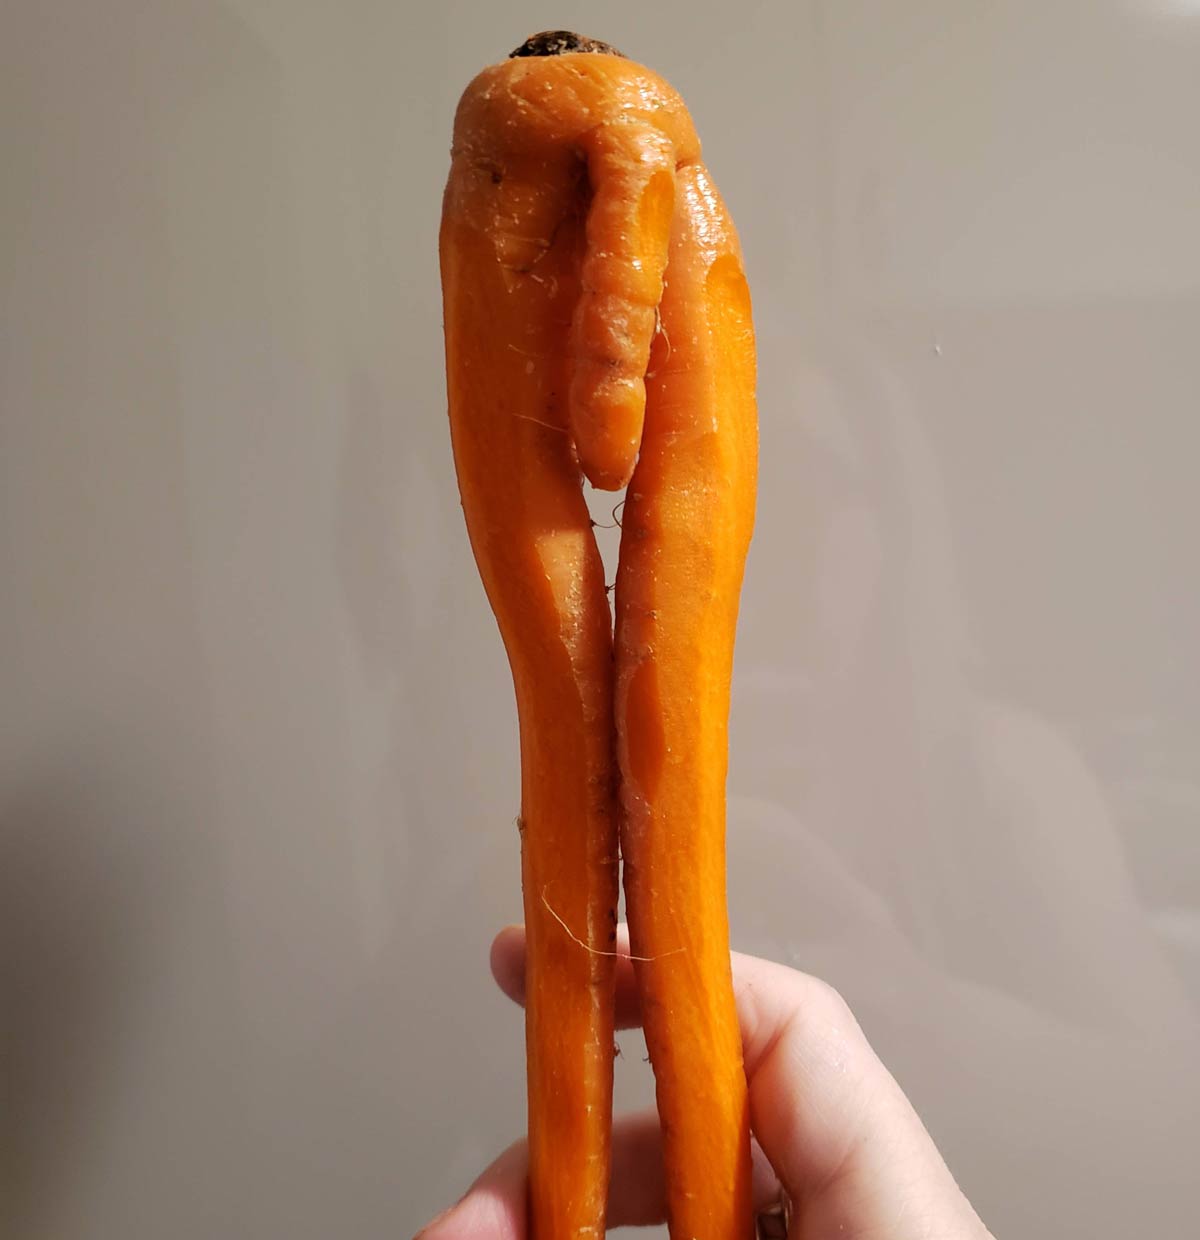 Confronted with this carrot while putting together a pot roast